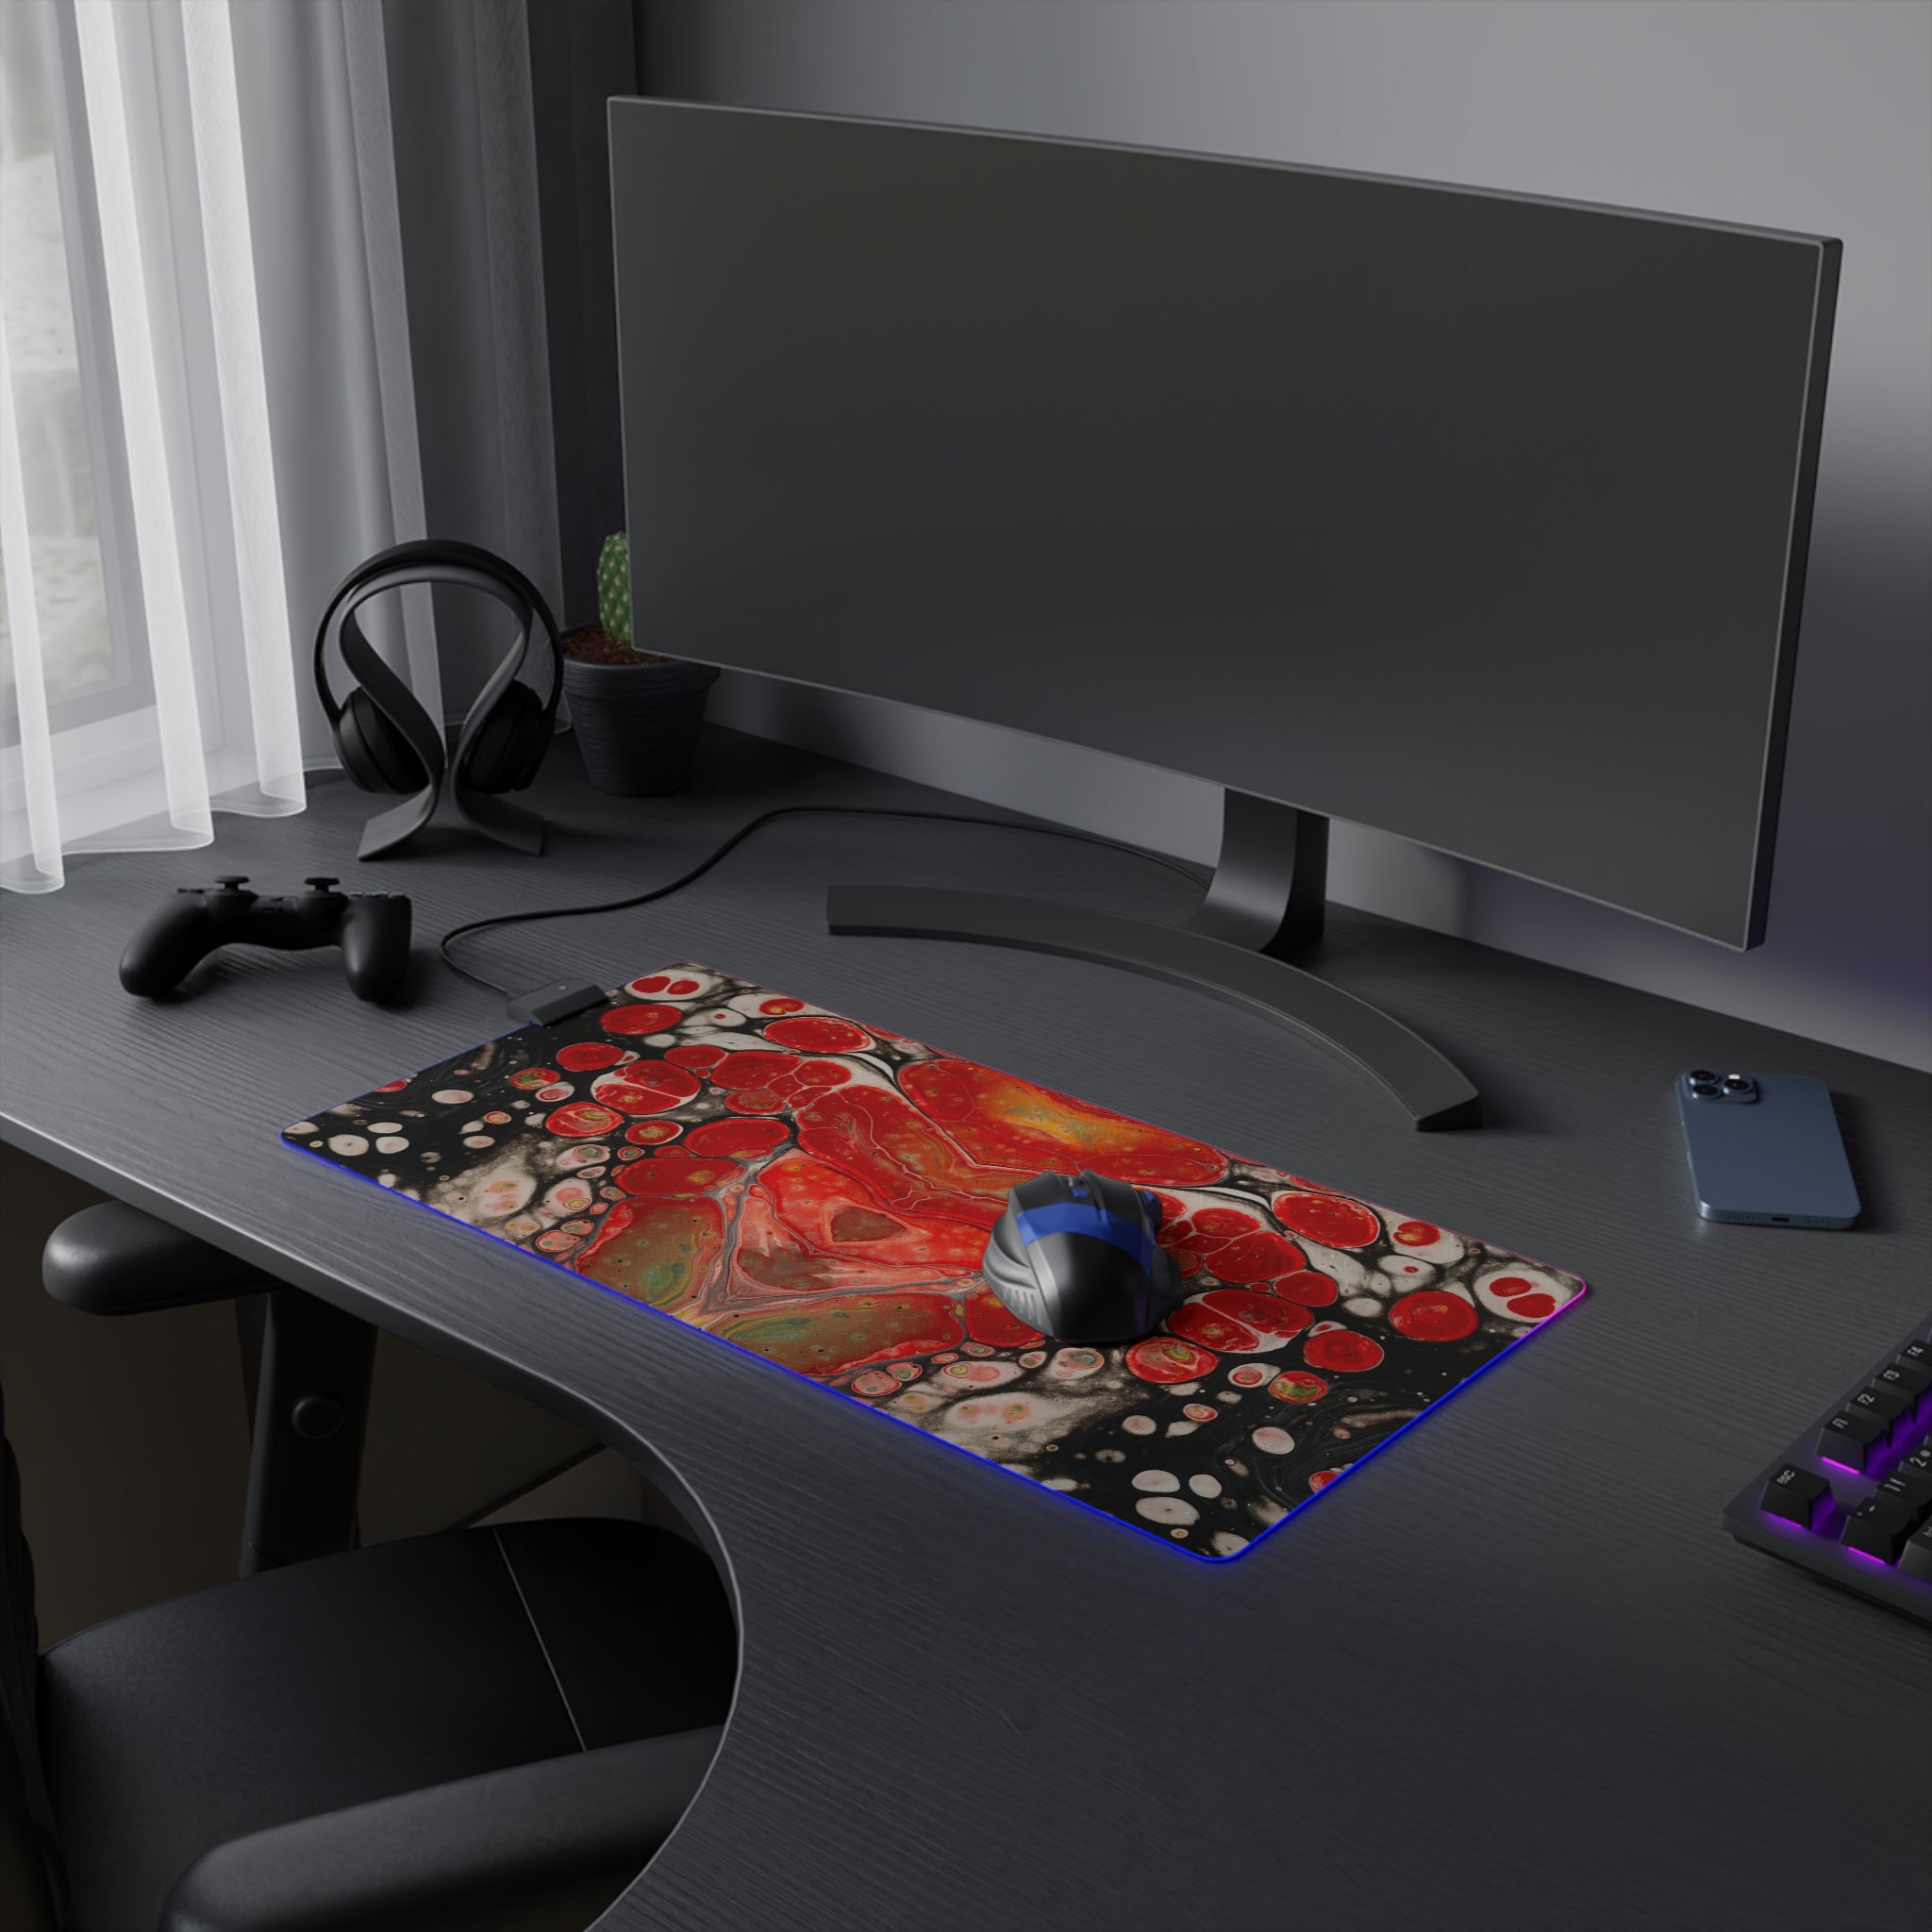 Cameron Creations - LED Gaming Mouse Pad - Exiting The Chaos - Concept 4